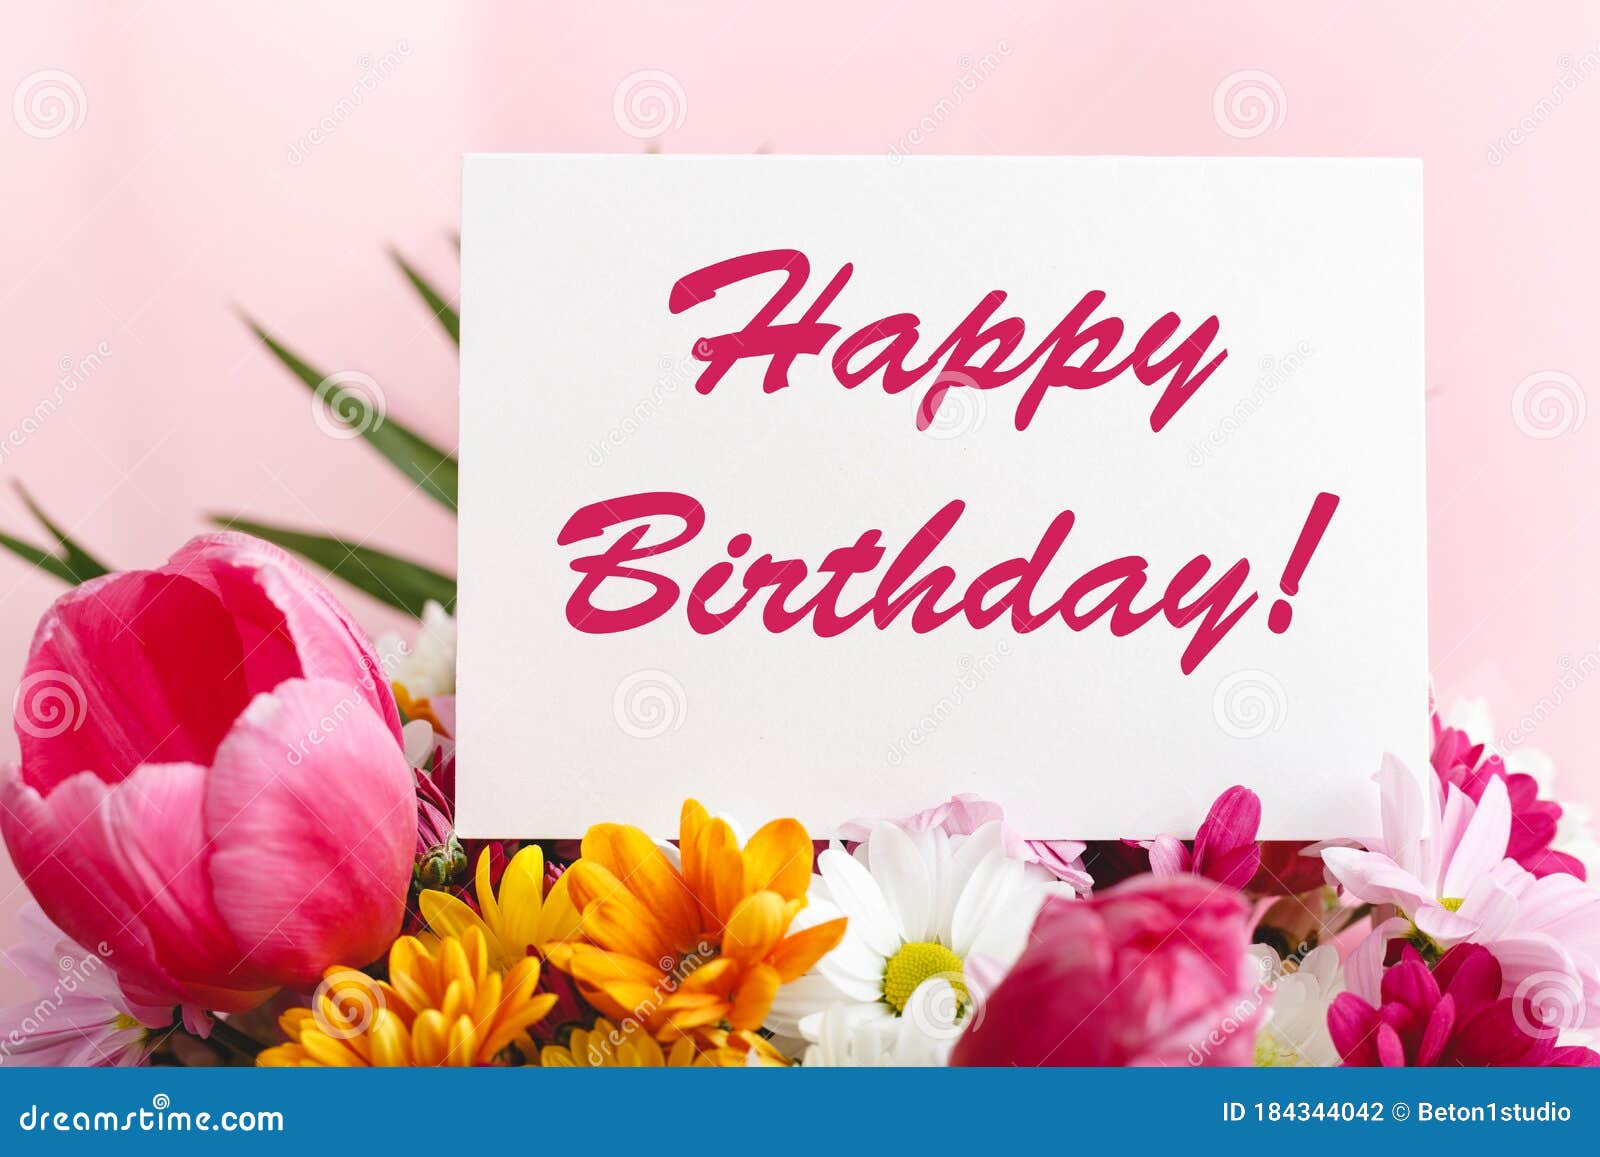 Happy Birthday Text on Card in Flower Bouquet on Pink Background ...